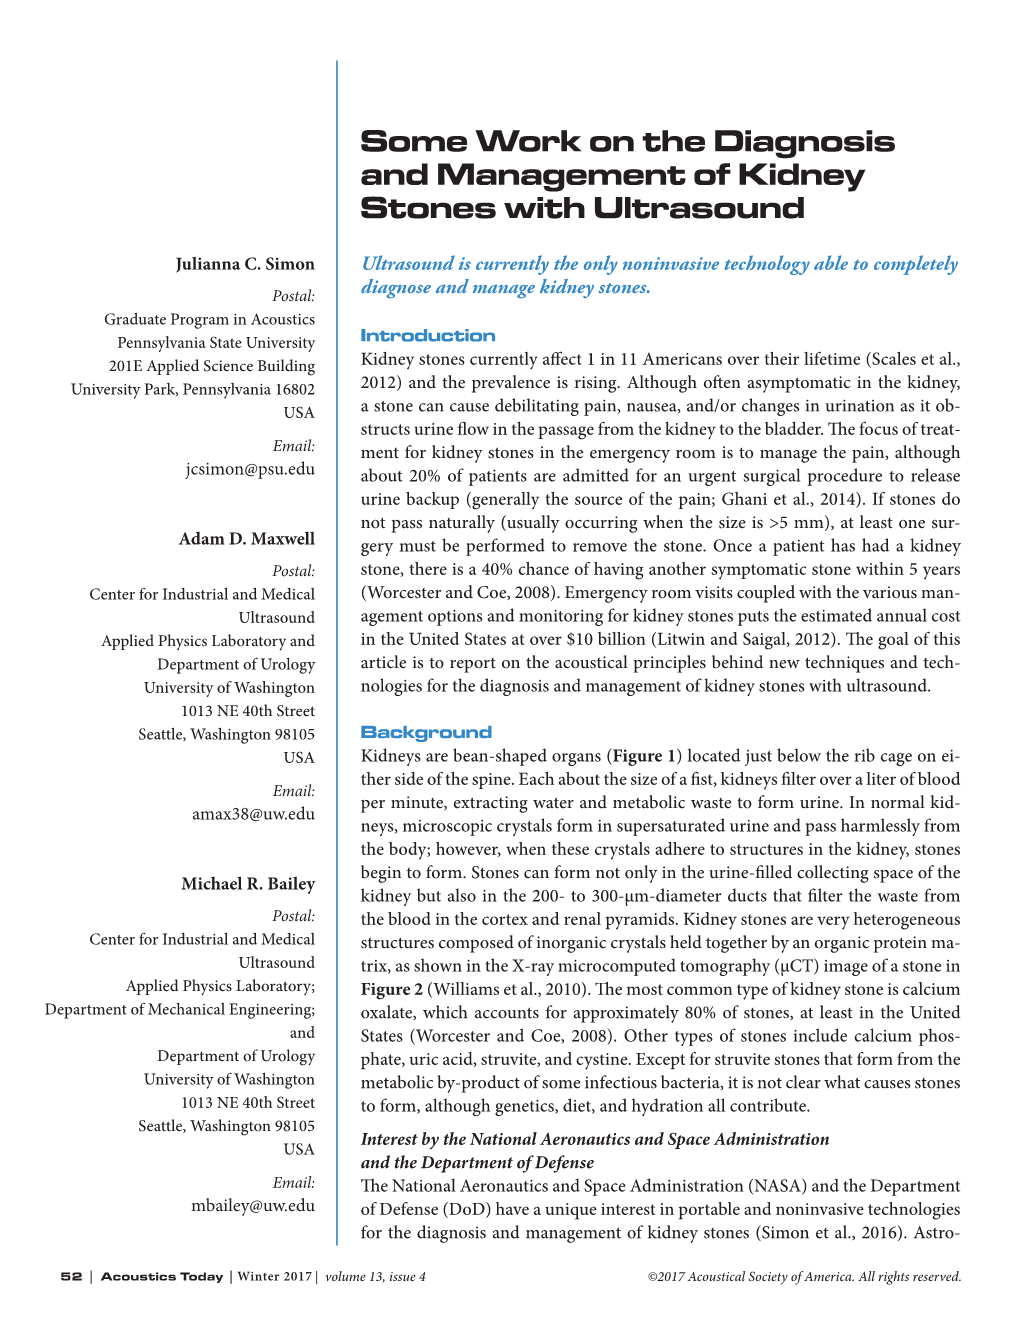 Some Work on the Diagnosis and Management of Kidney Stones with Ultrasound